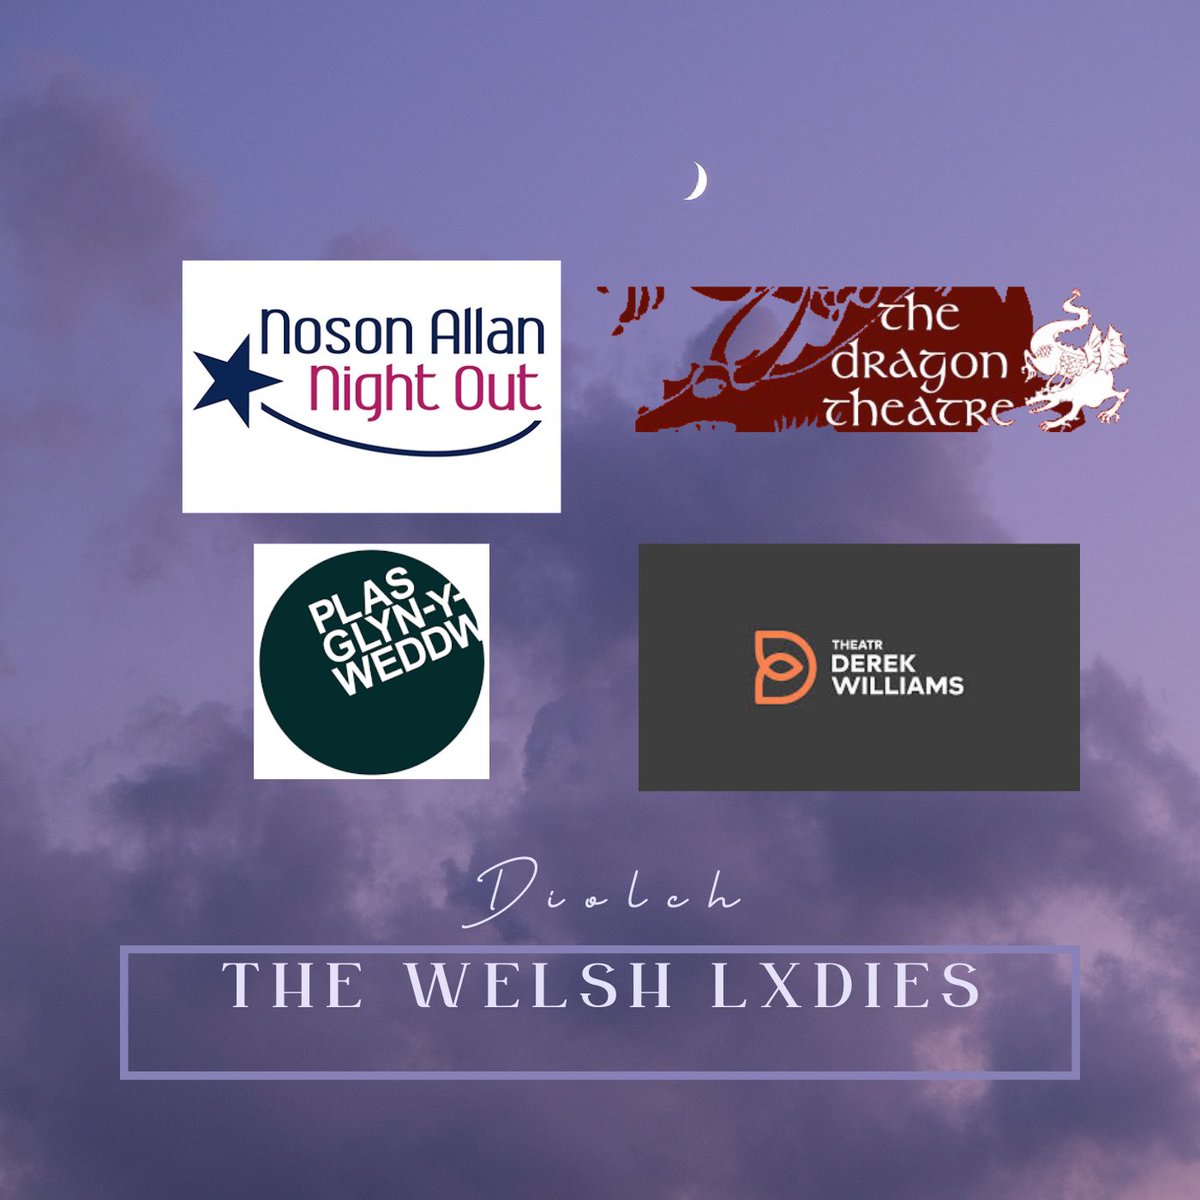 Did you know that our North Wales leg of #thewelshlxdiesontour is supported by @NOutNAllan ? An @Arts_Wales_ programme to reach more rural venues in wales…which is perfect for our production celebrating Womxn of Wales! Be sure to grab your tickets! #NosonAllanNightOut #ArtsWales